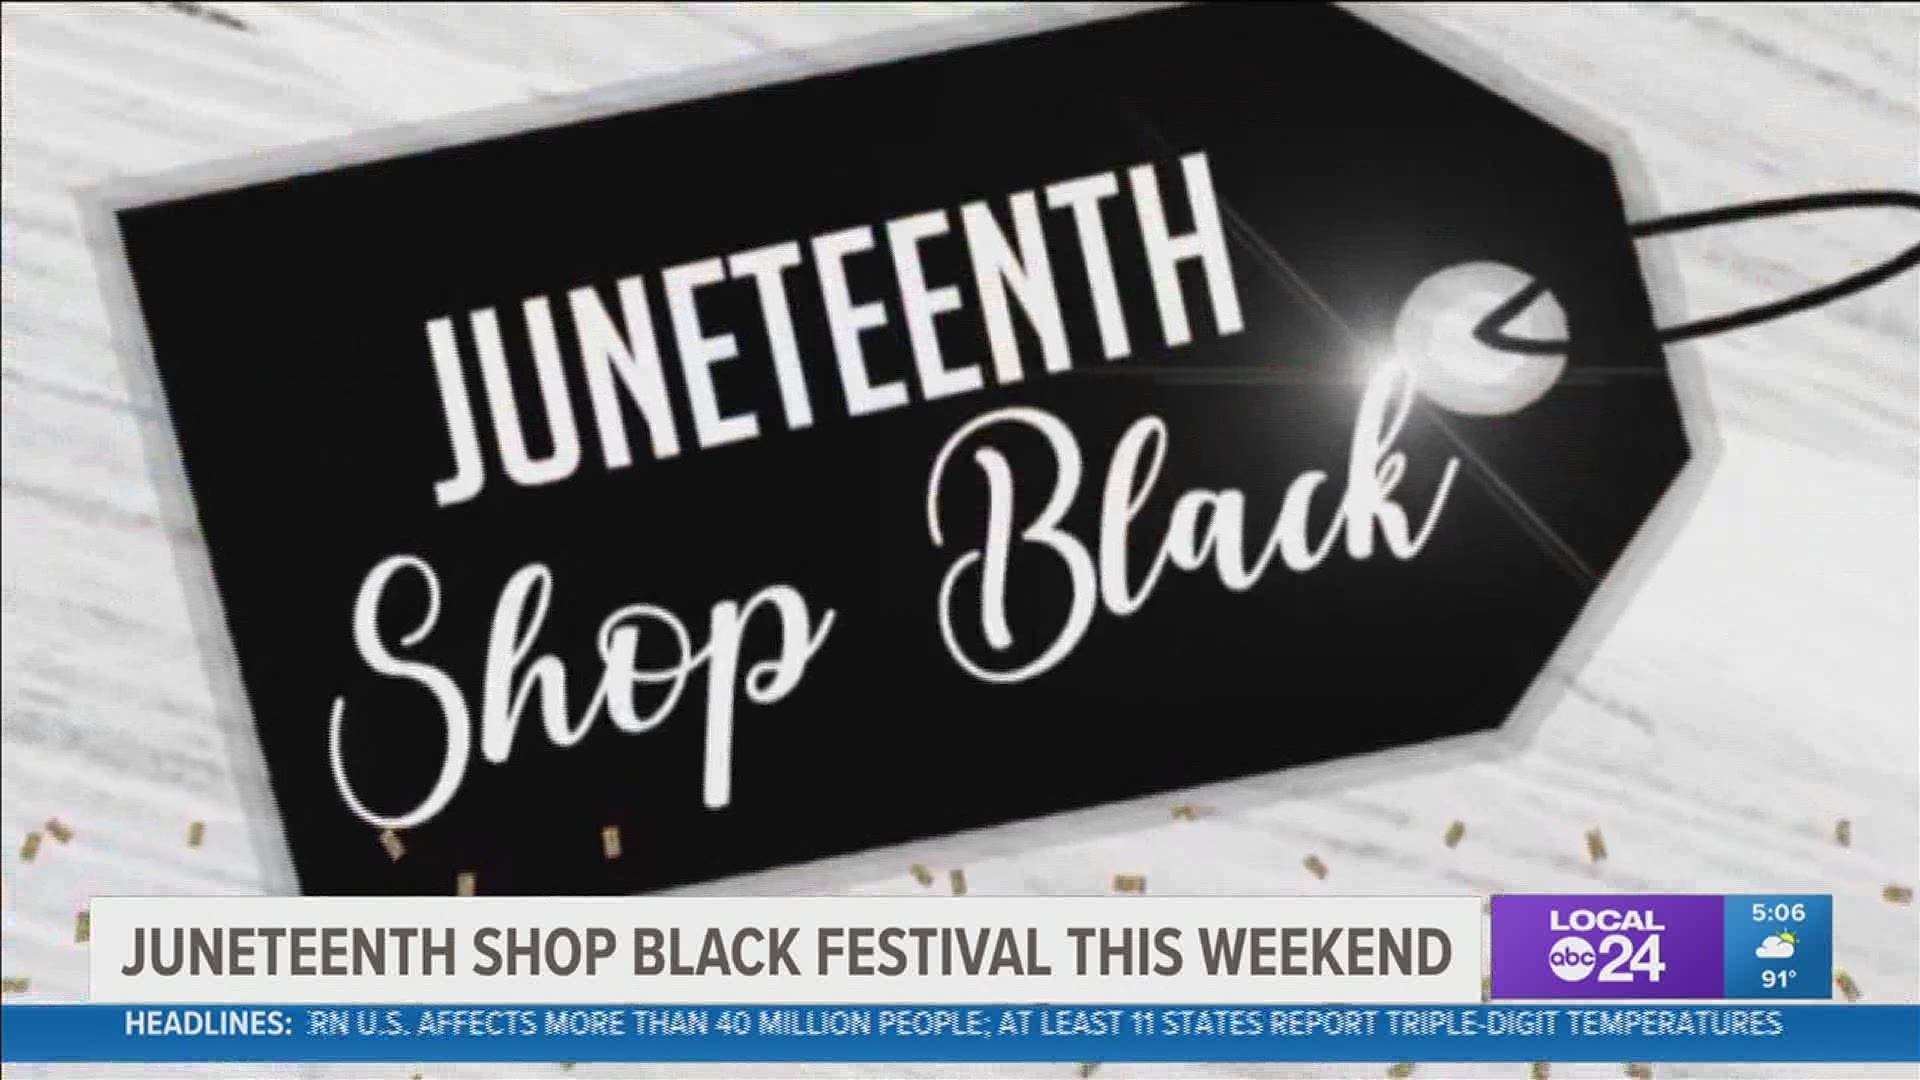 More than 50 Black-owned businesses will be at the Juneteenth Shop Black Festival